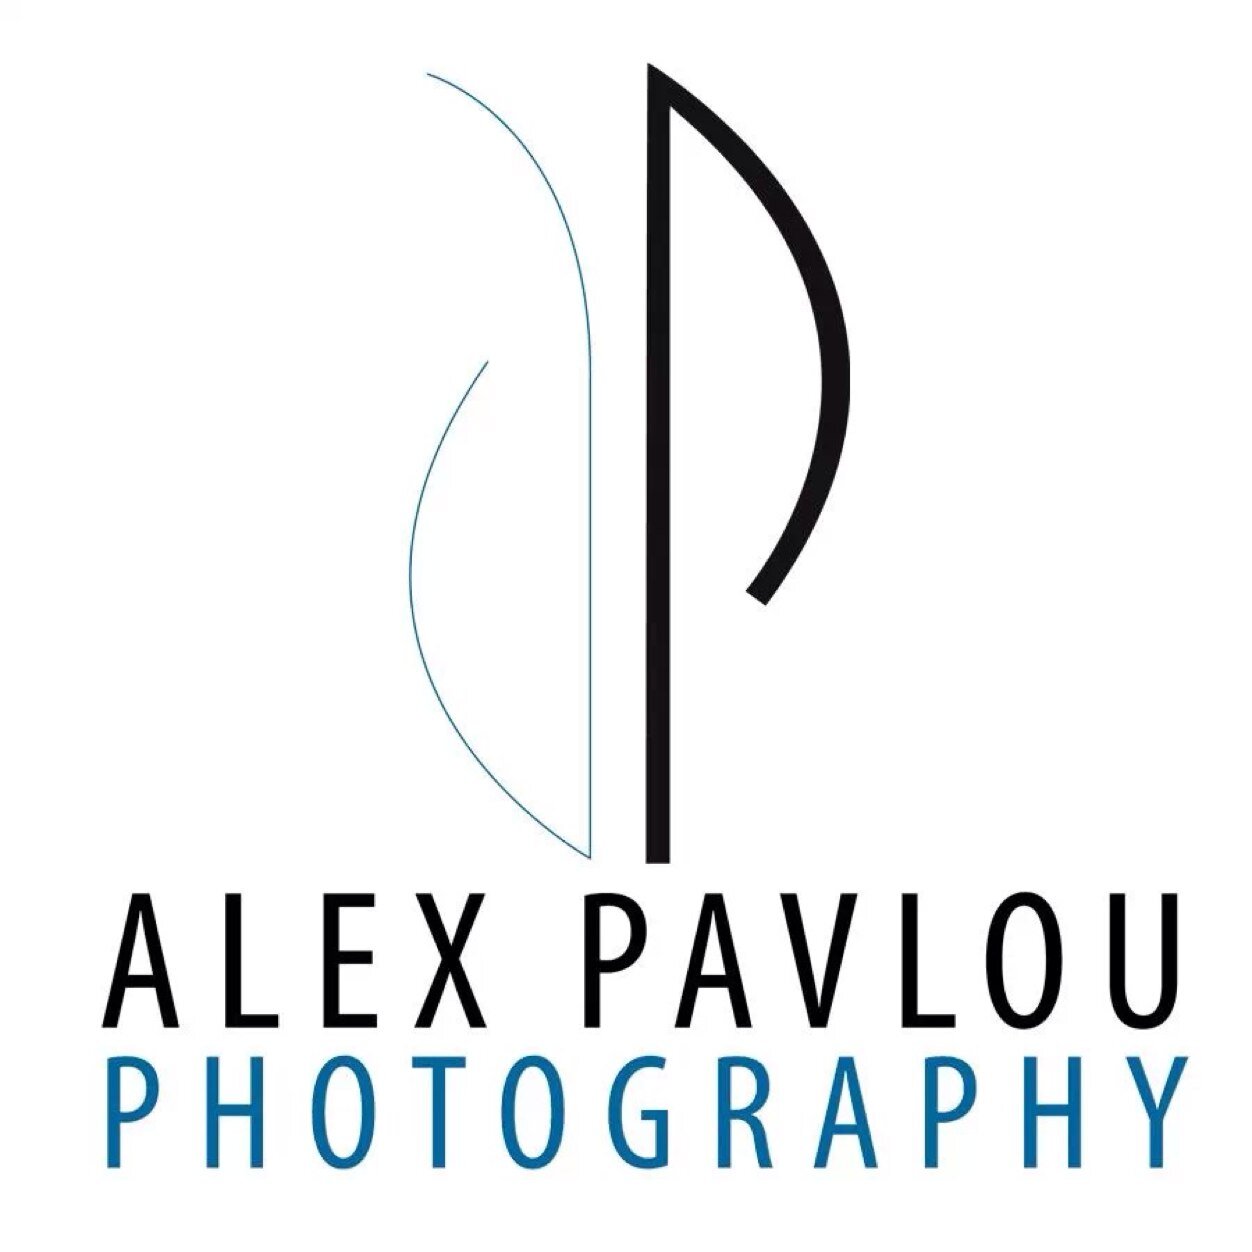 Alex Pavlou Photography team produces a style that is unique and will capture the spirit and memories of your special day that will be cherished forever.